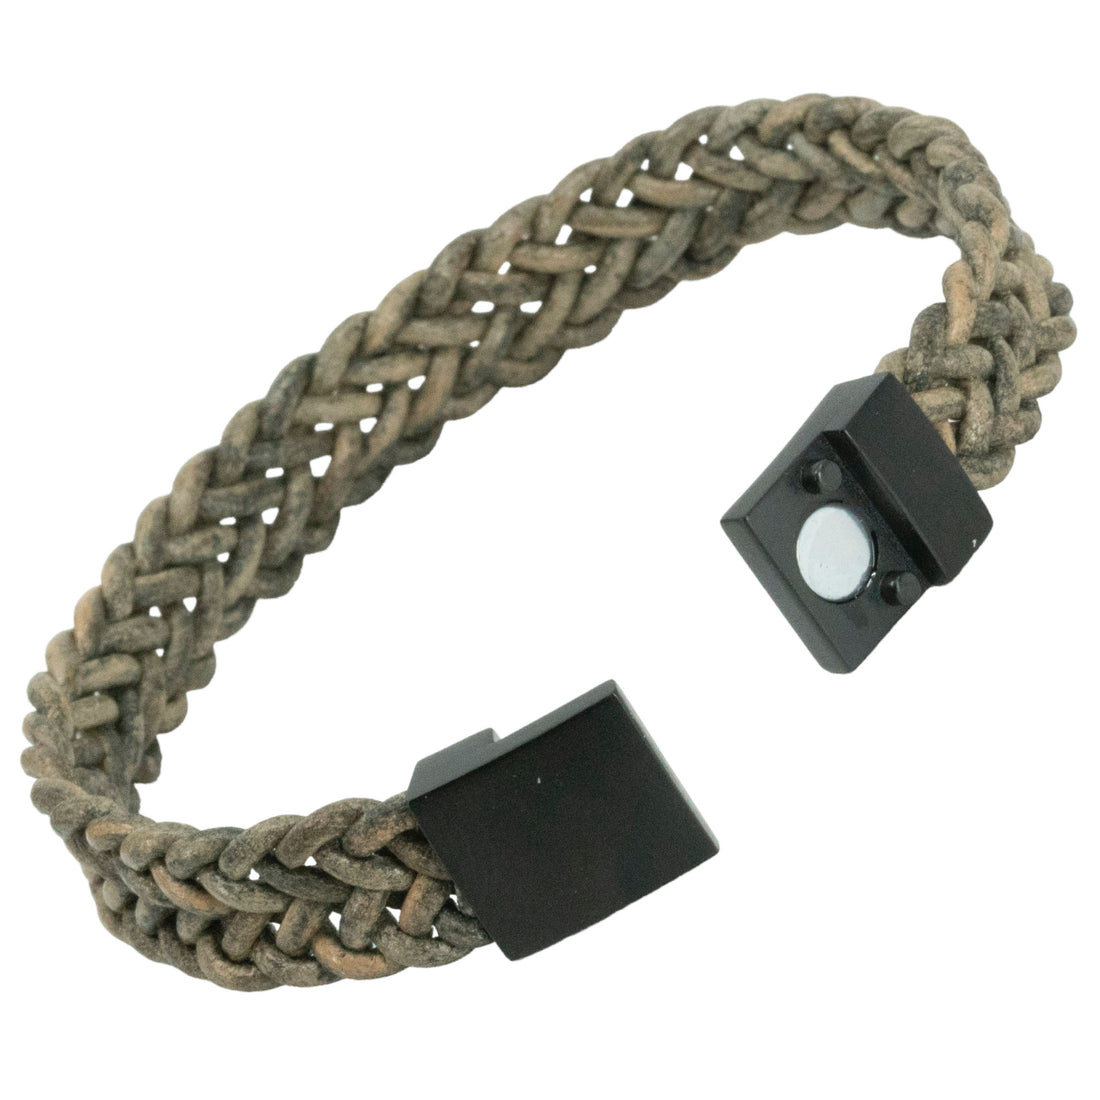 Black Stainless Steel Bracelet with engraving - braided leather